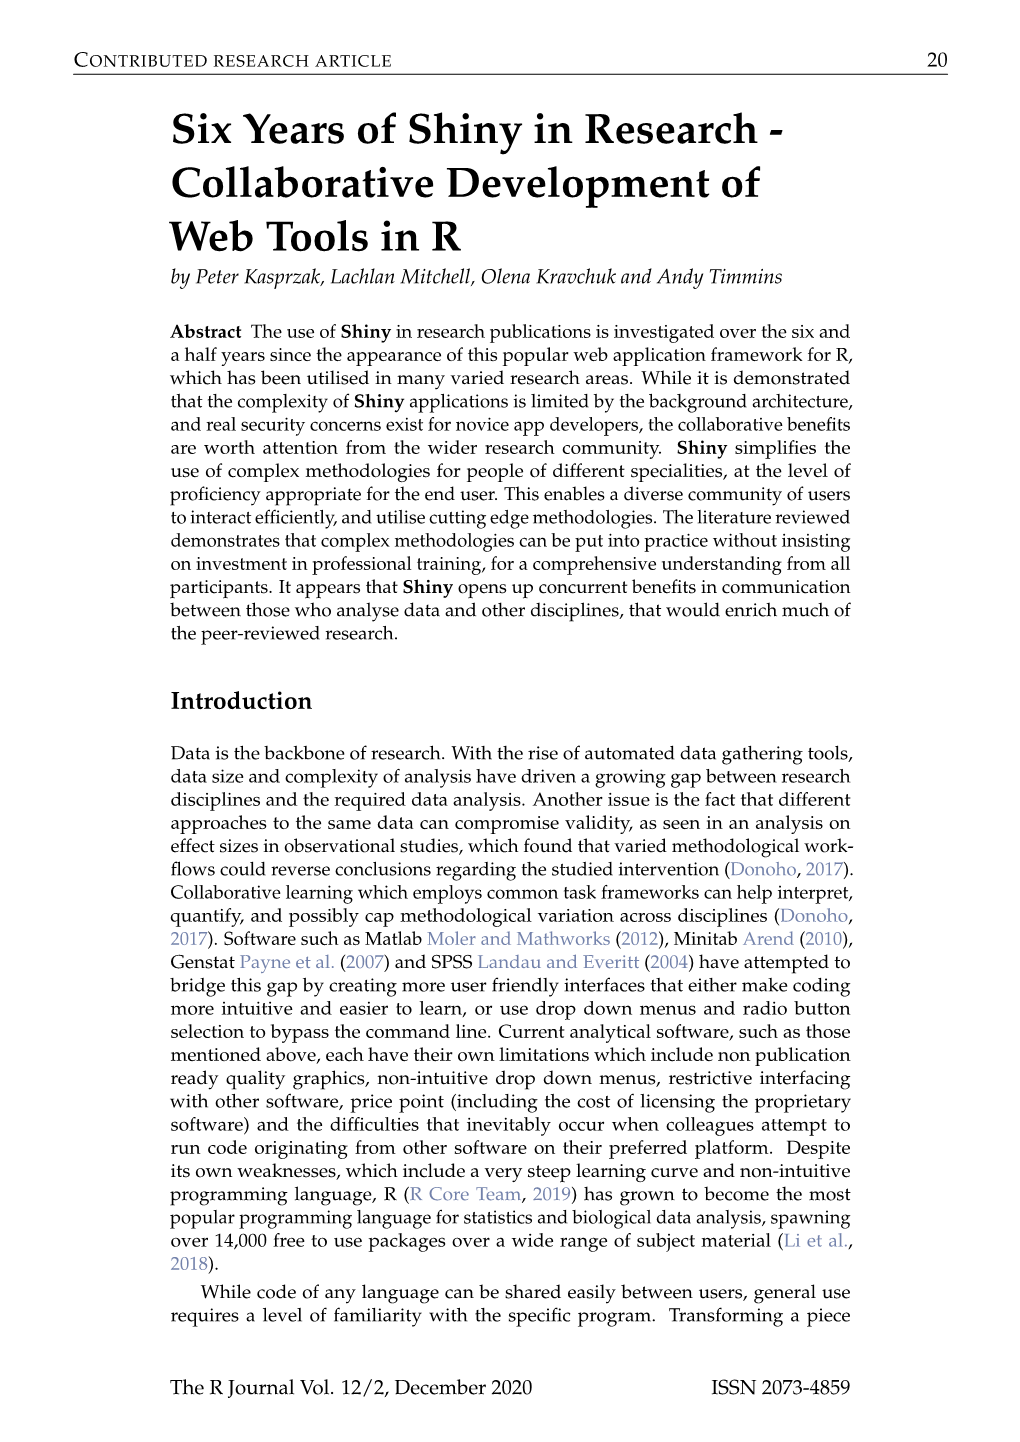 Collaborative Development of Web Tools in R by Peter Kasprzak, Lachlan Mitchell, Olena Kravchuk and Andy Timmins